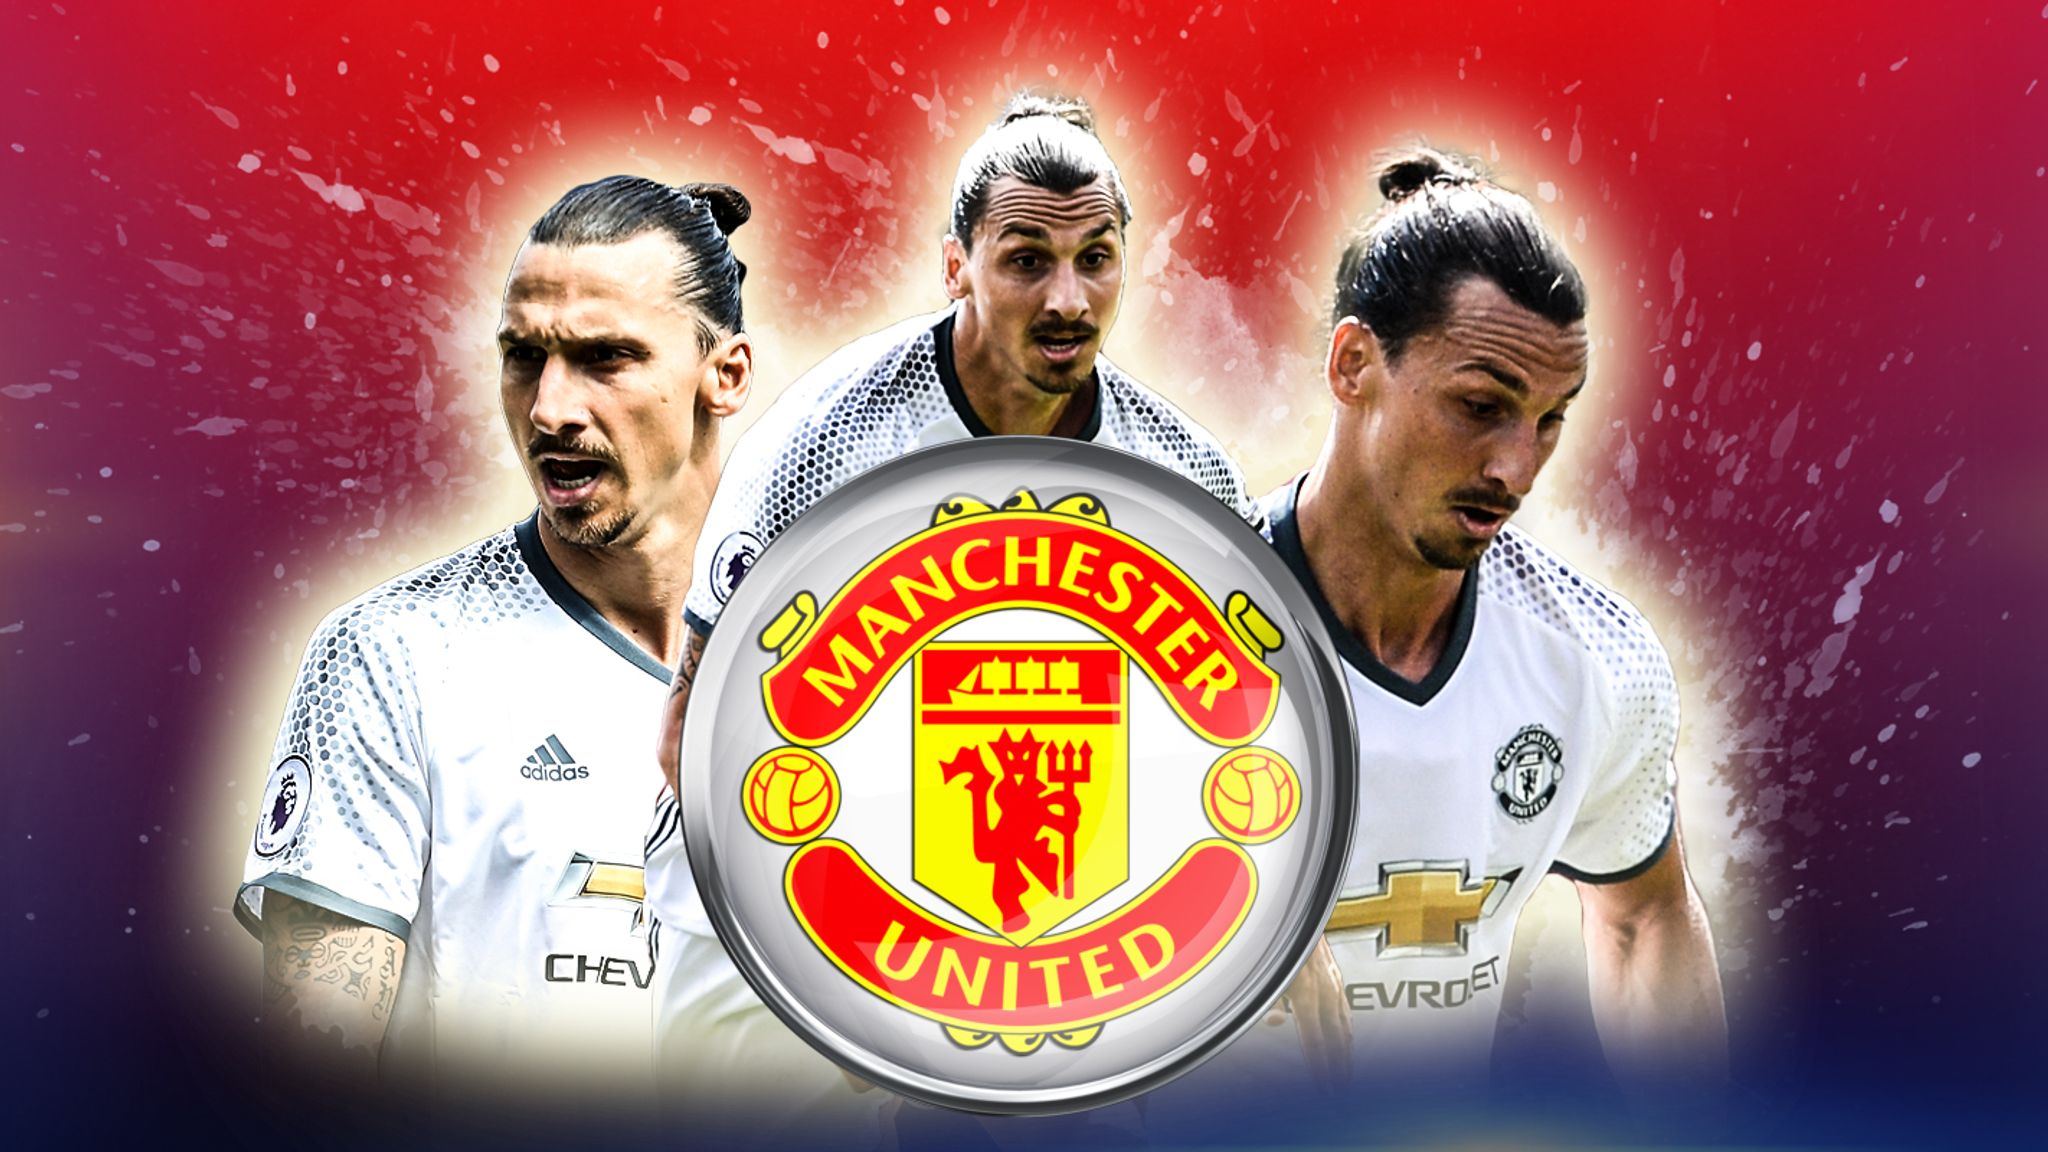 Manchester United PL4 Topps Crossover Z Ibrahimovic PL Transfers 2016 